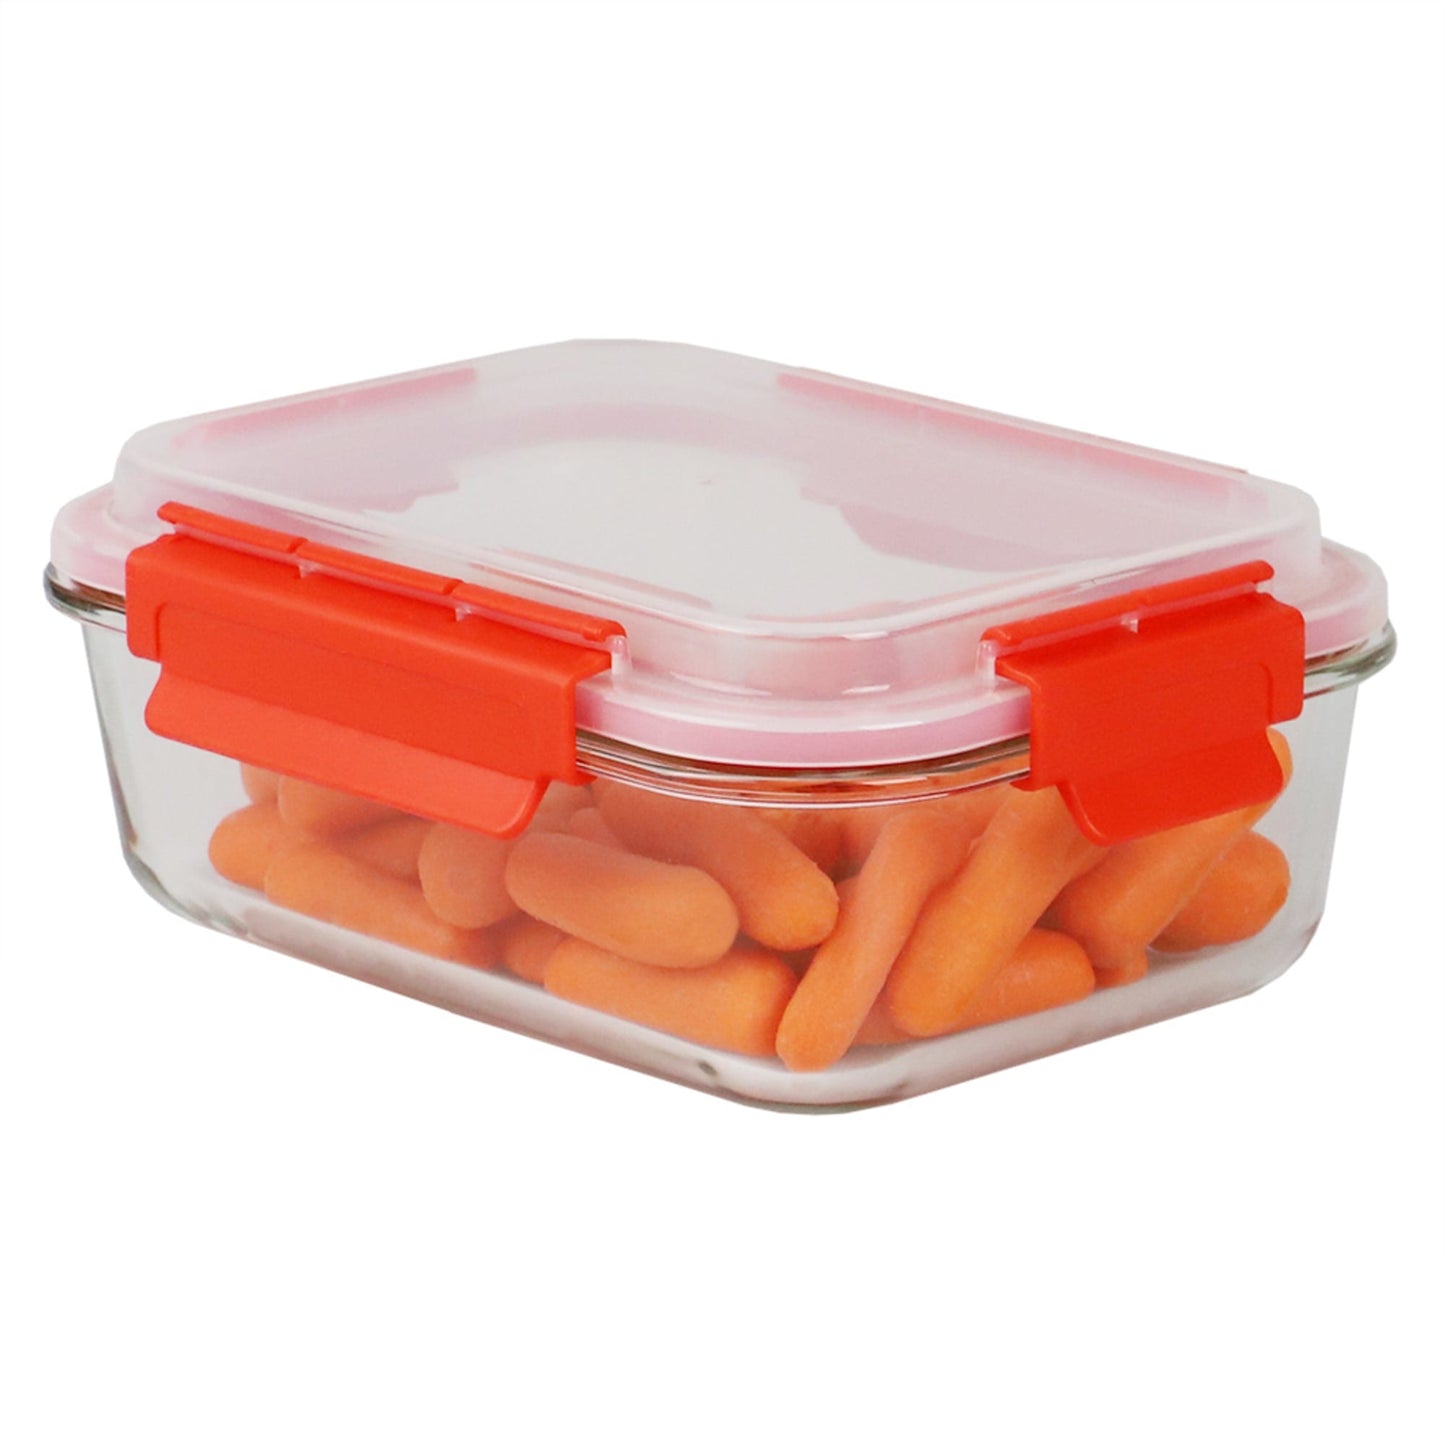 Rectangular Stainless Steel Containers | Microwave-Safe Green / 51 Ounces